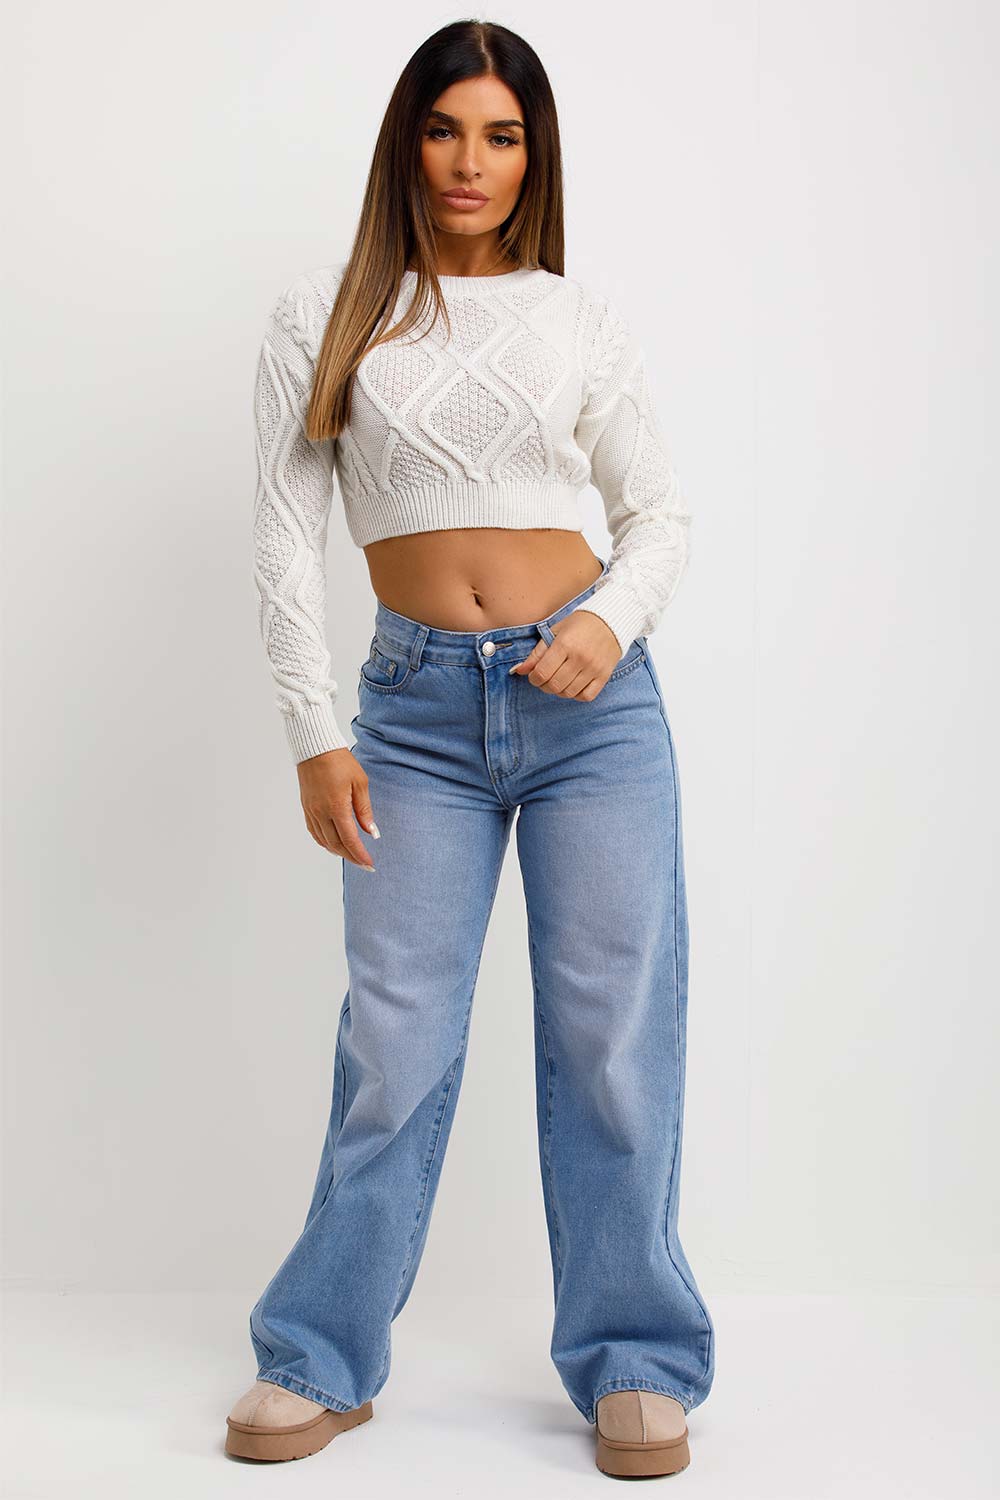 white cable knit jumper cropped long sleeve knitted top